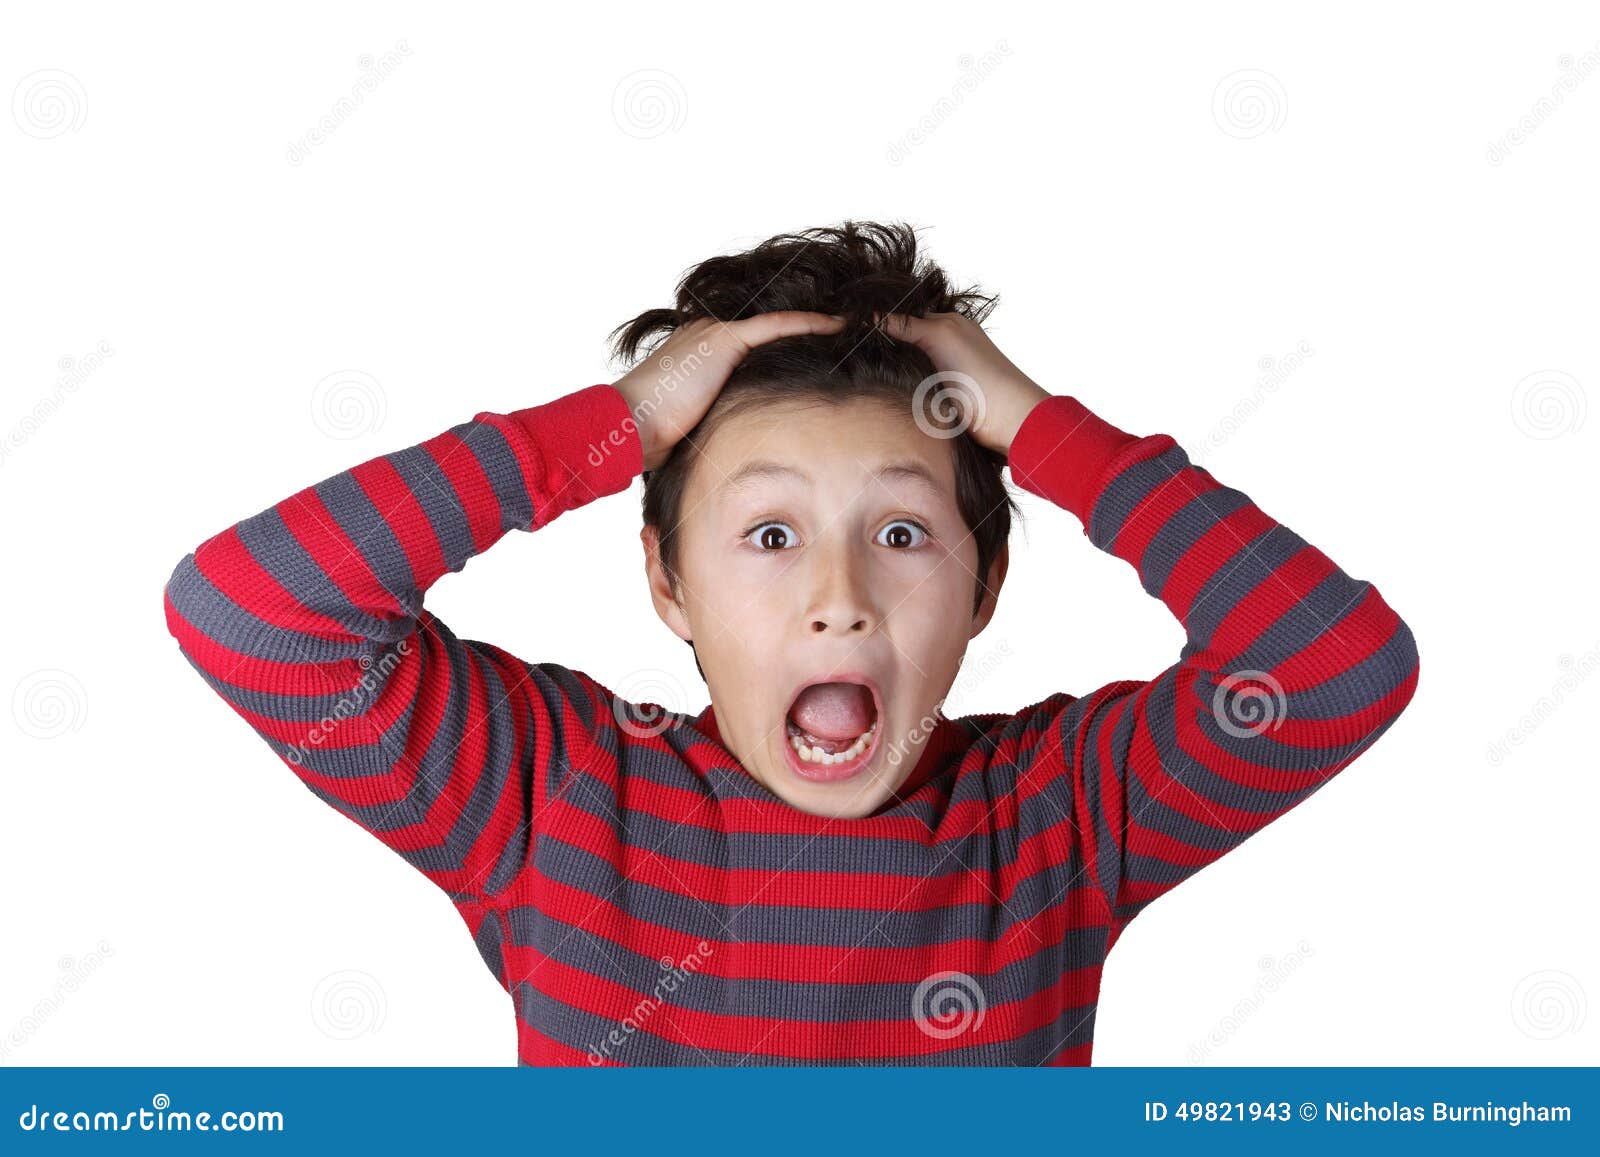 young-boy-shocked-expression-white-isolated-background-49821943.jpg